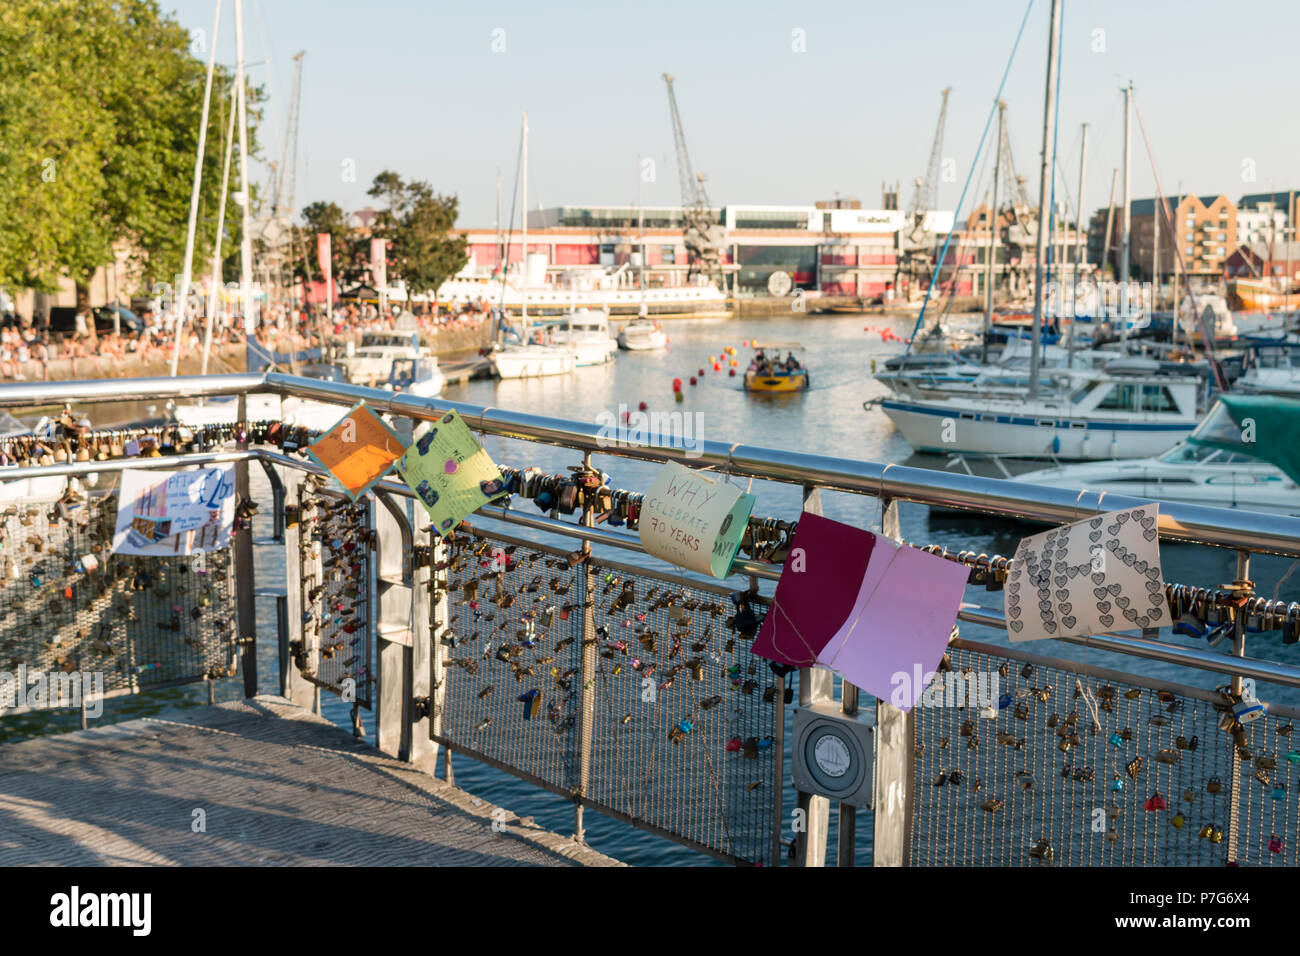 Bristol, UK. 6th July 2018. Pero's Bridge in Bristol has been decorated by locals with birthday cards and messages celebrating the NHS in honour of it's 70th birthday.  Credit Paul Hennell / Alamy Live News Stock Photo